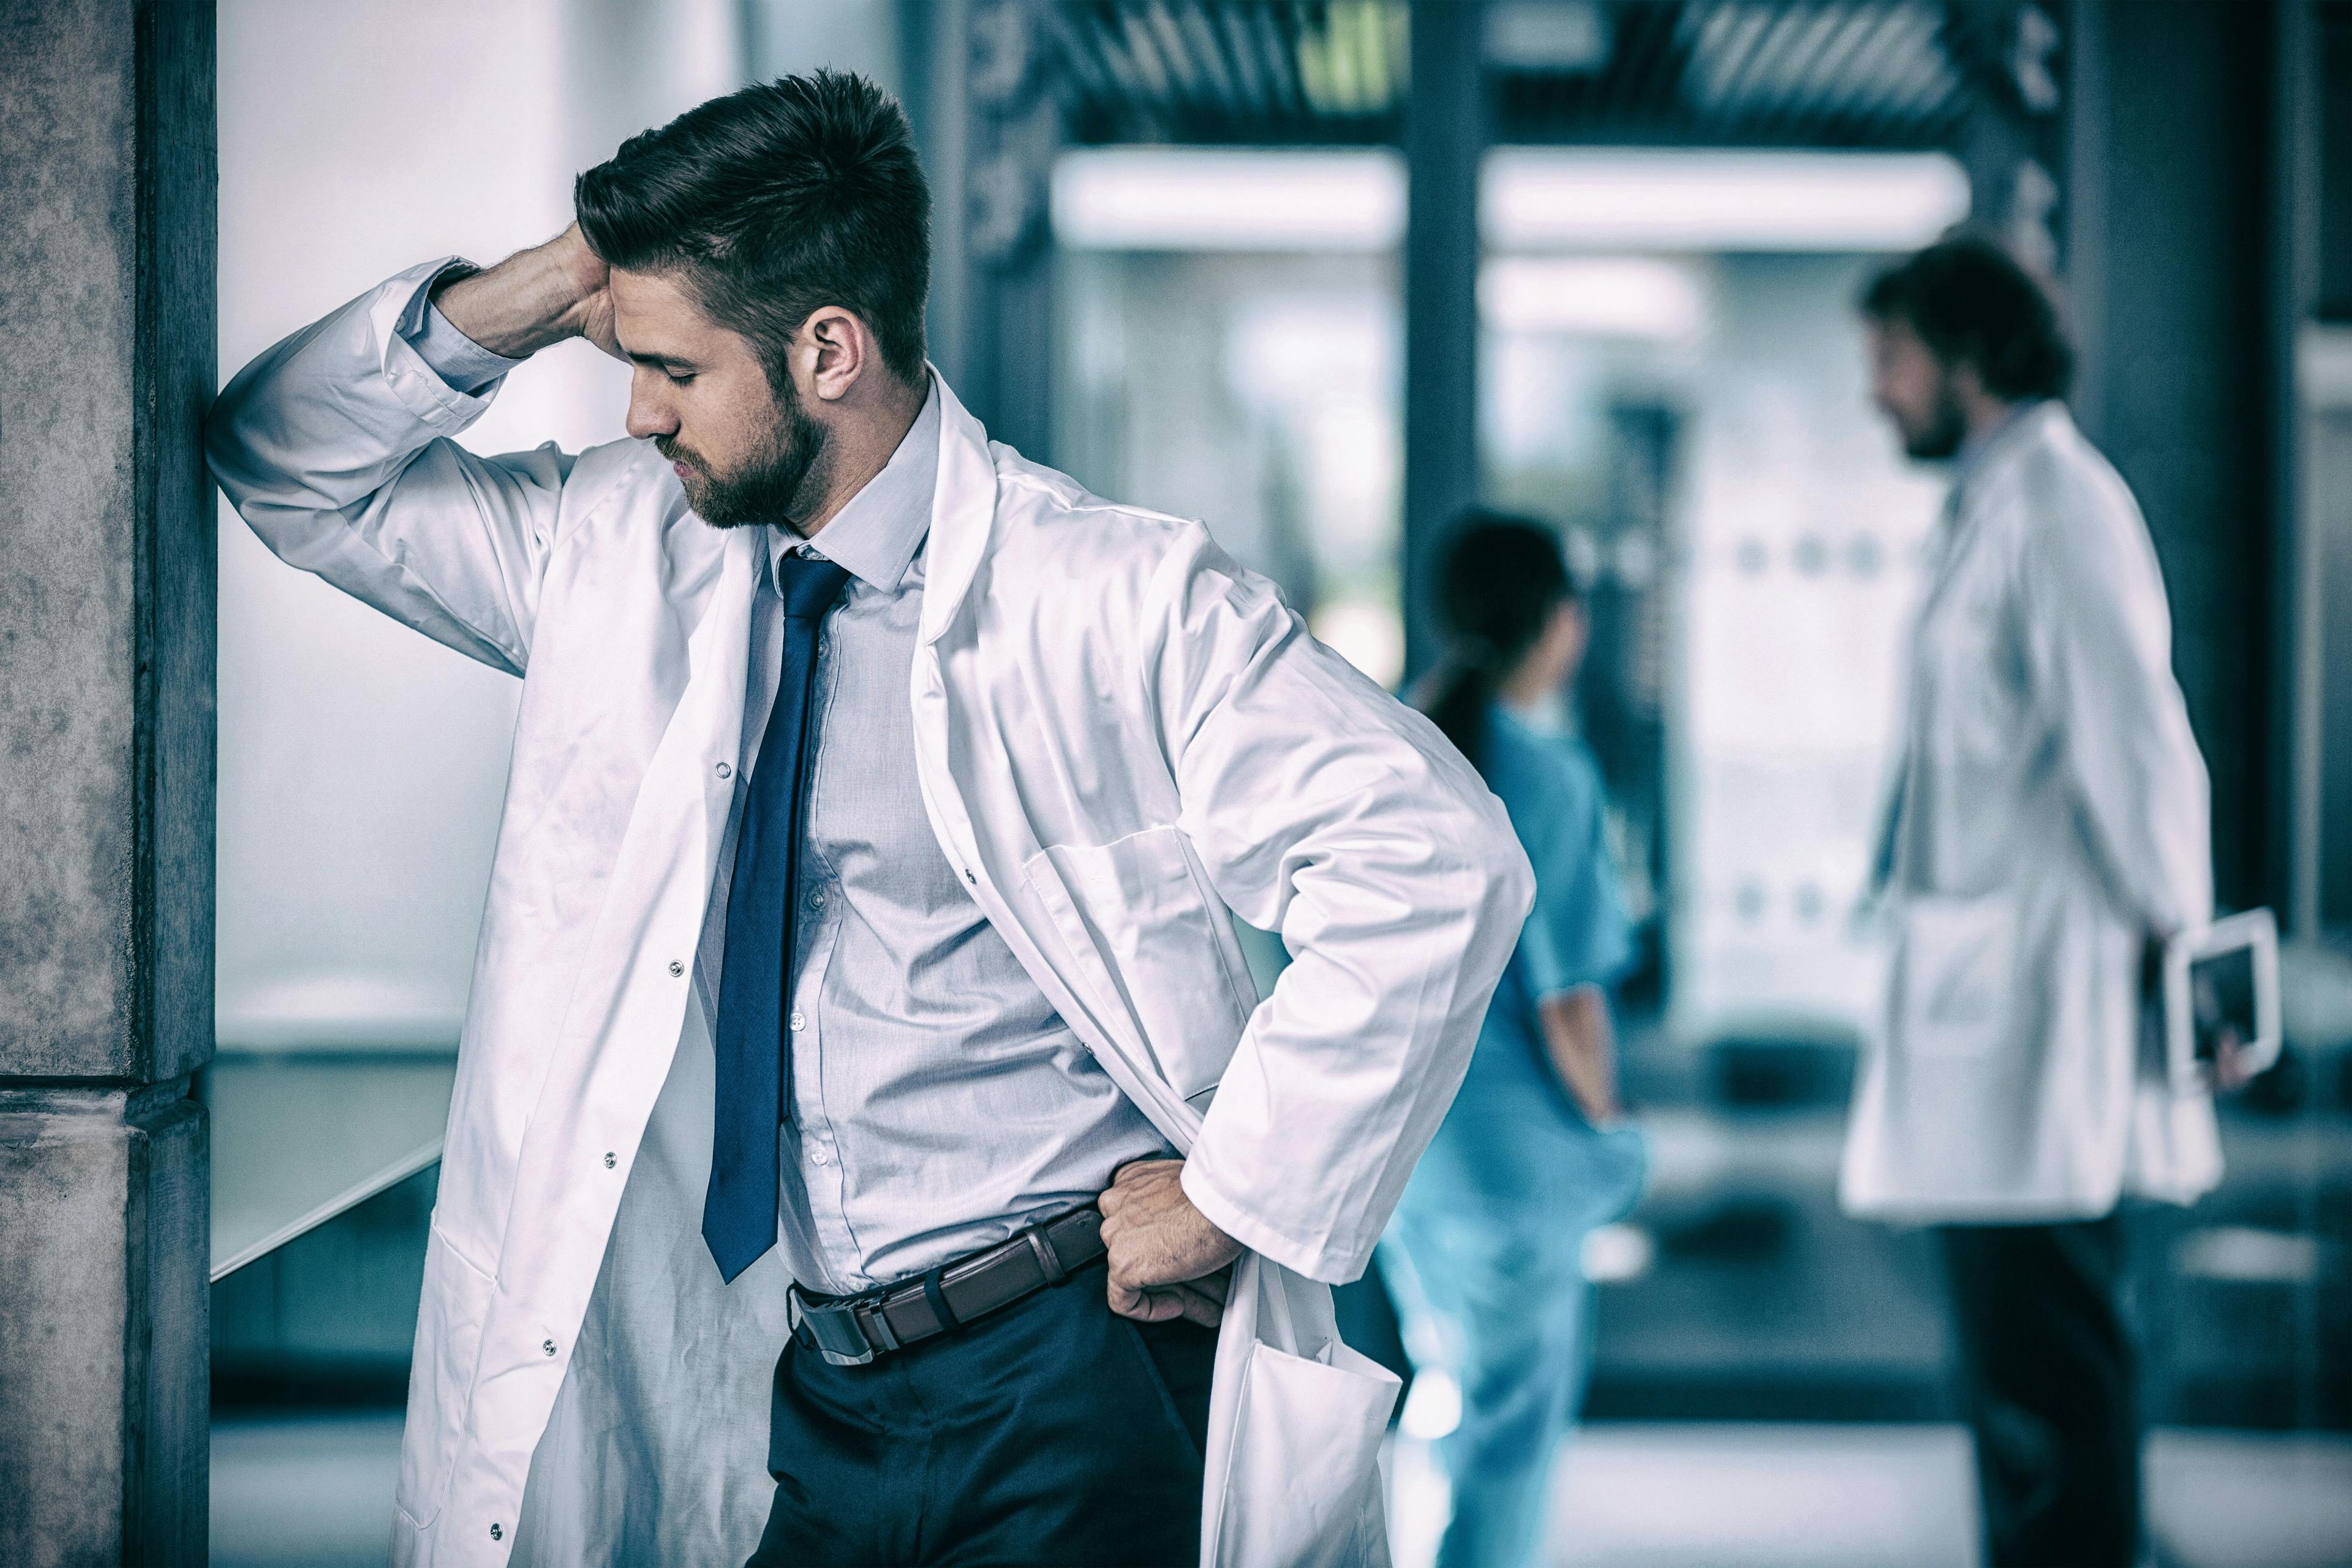 Most emergency physicians say violence is rising